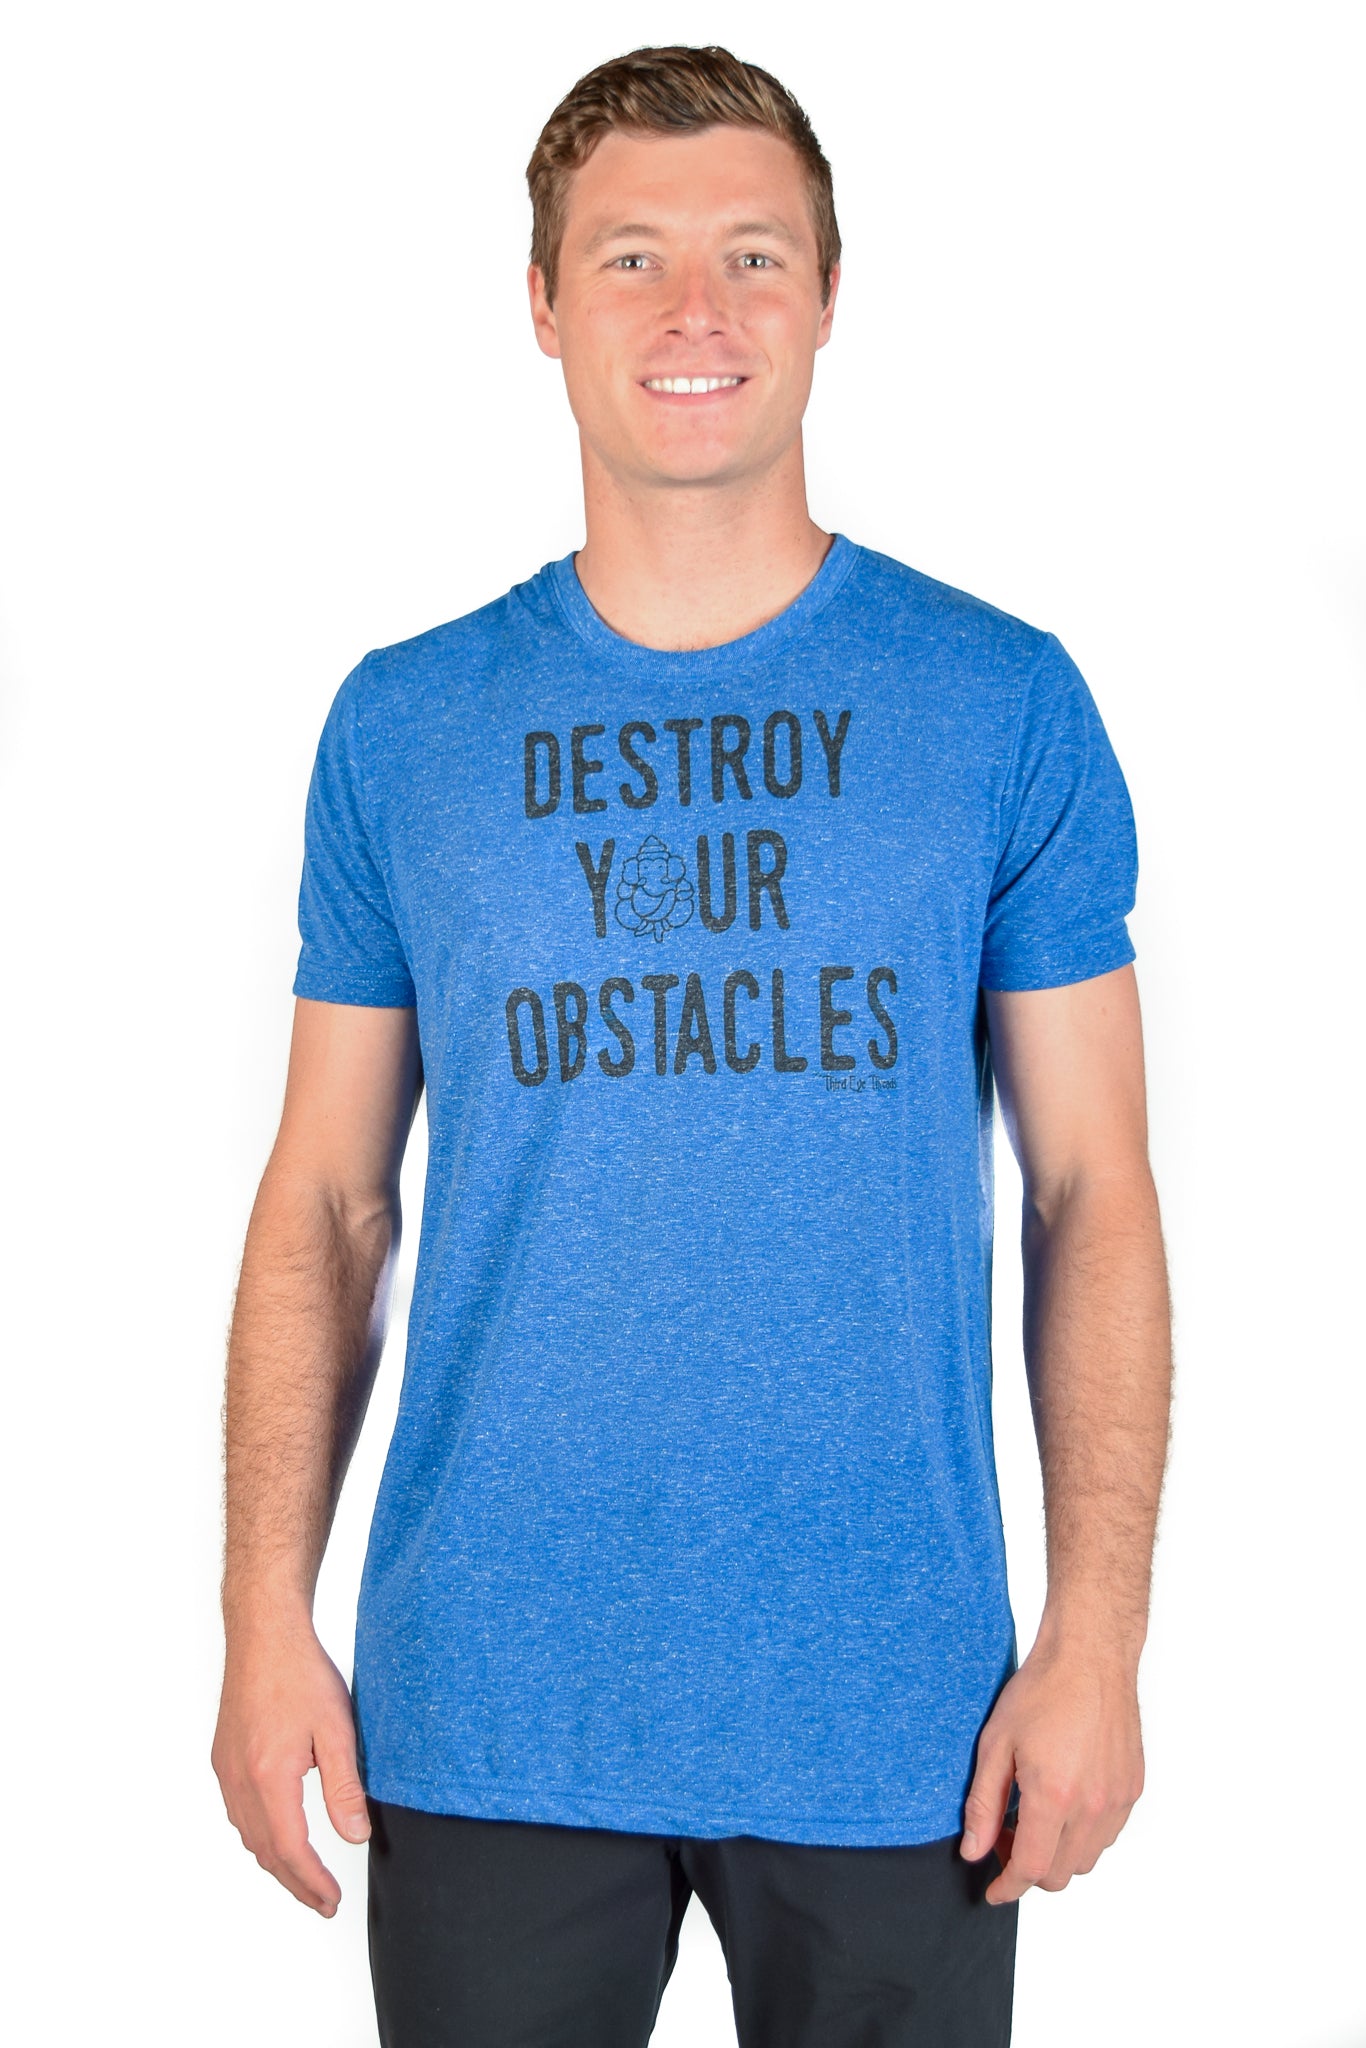 DESTROY YOUR OBSTACLES ON LINEN BLEND CREW NECK - Third Eye Threads